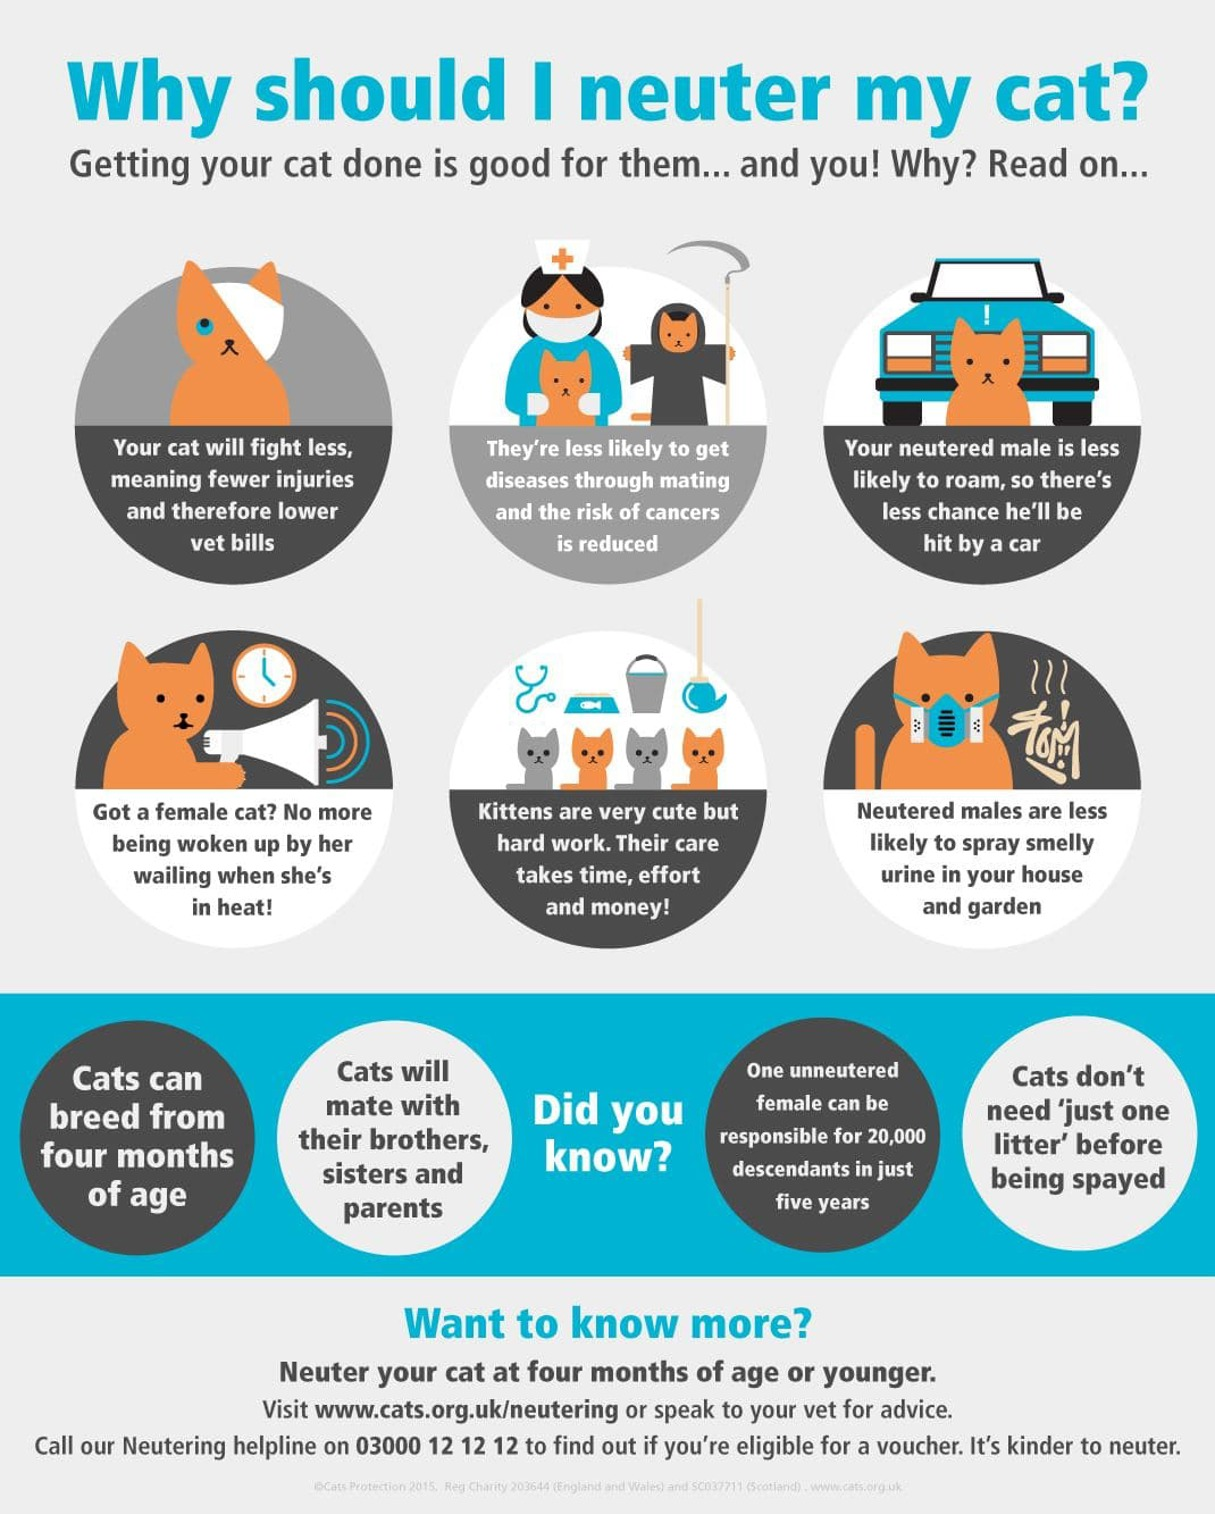 Neutering advice graphic for cats